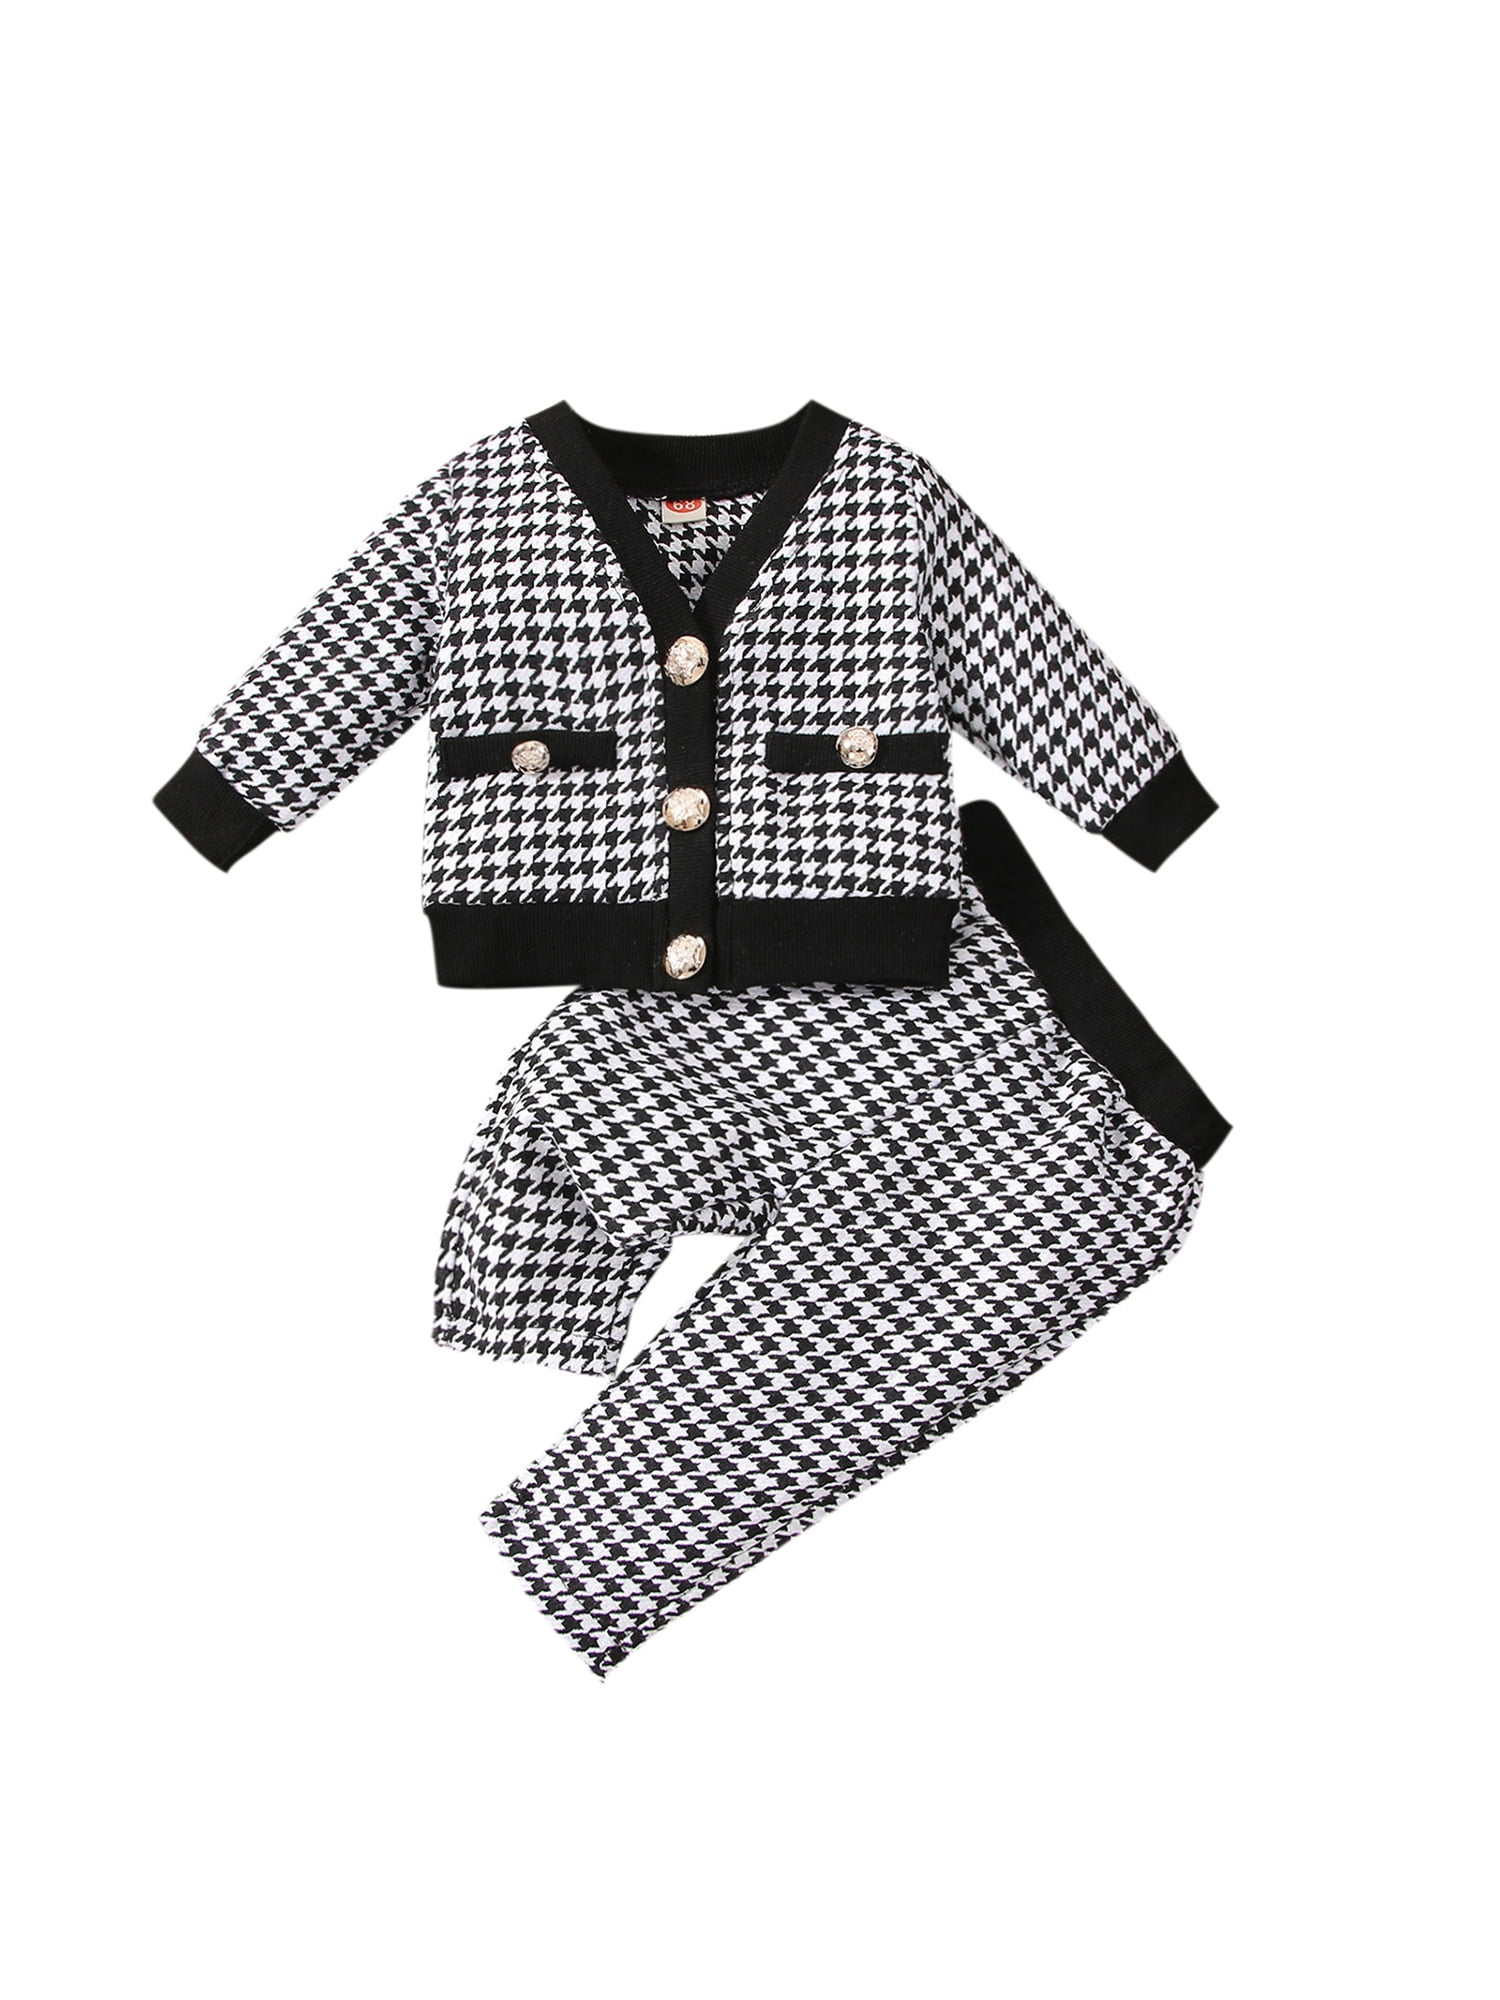 Black and White Houndstooth Patterned Dress Pants Theater Halloween Costume